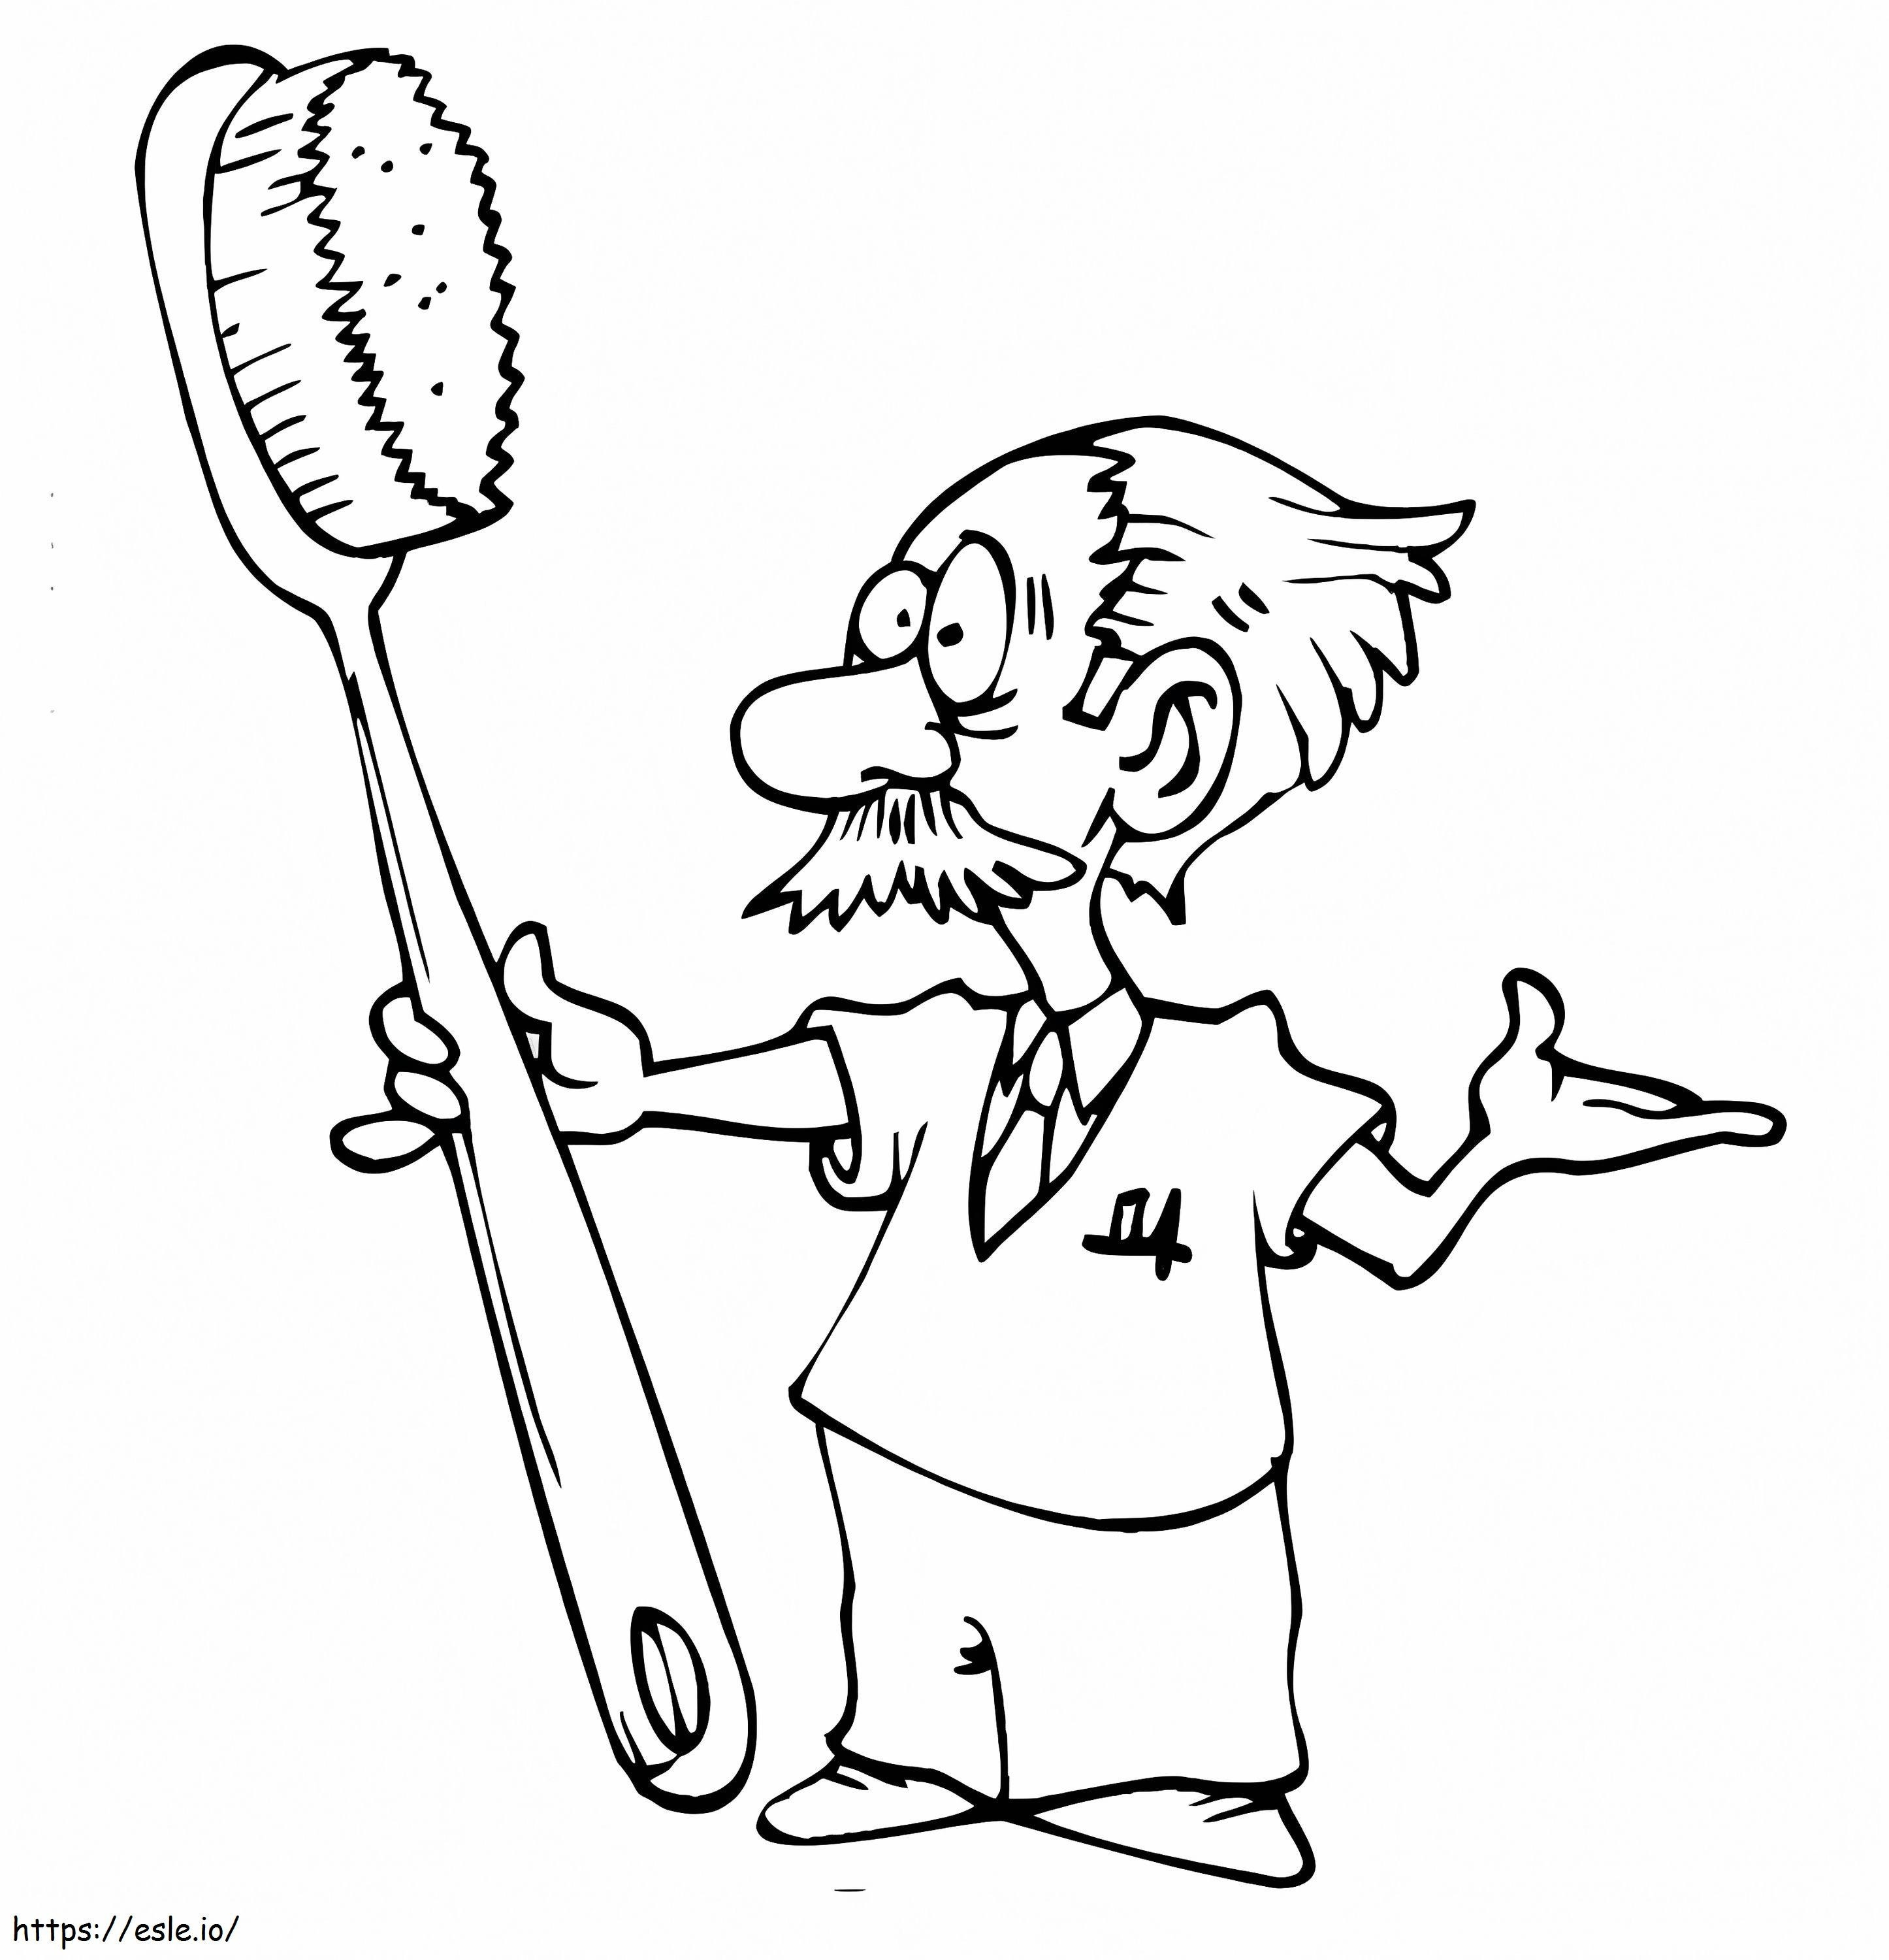 Dentist And Big Brush coloring page